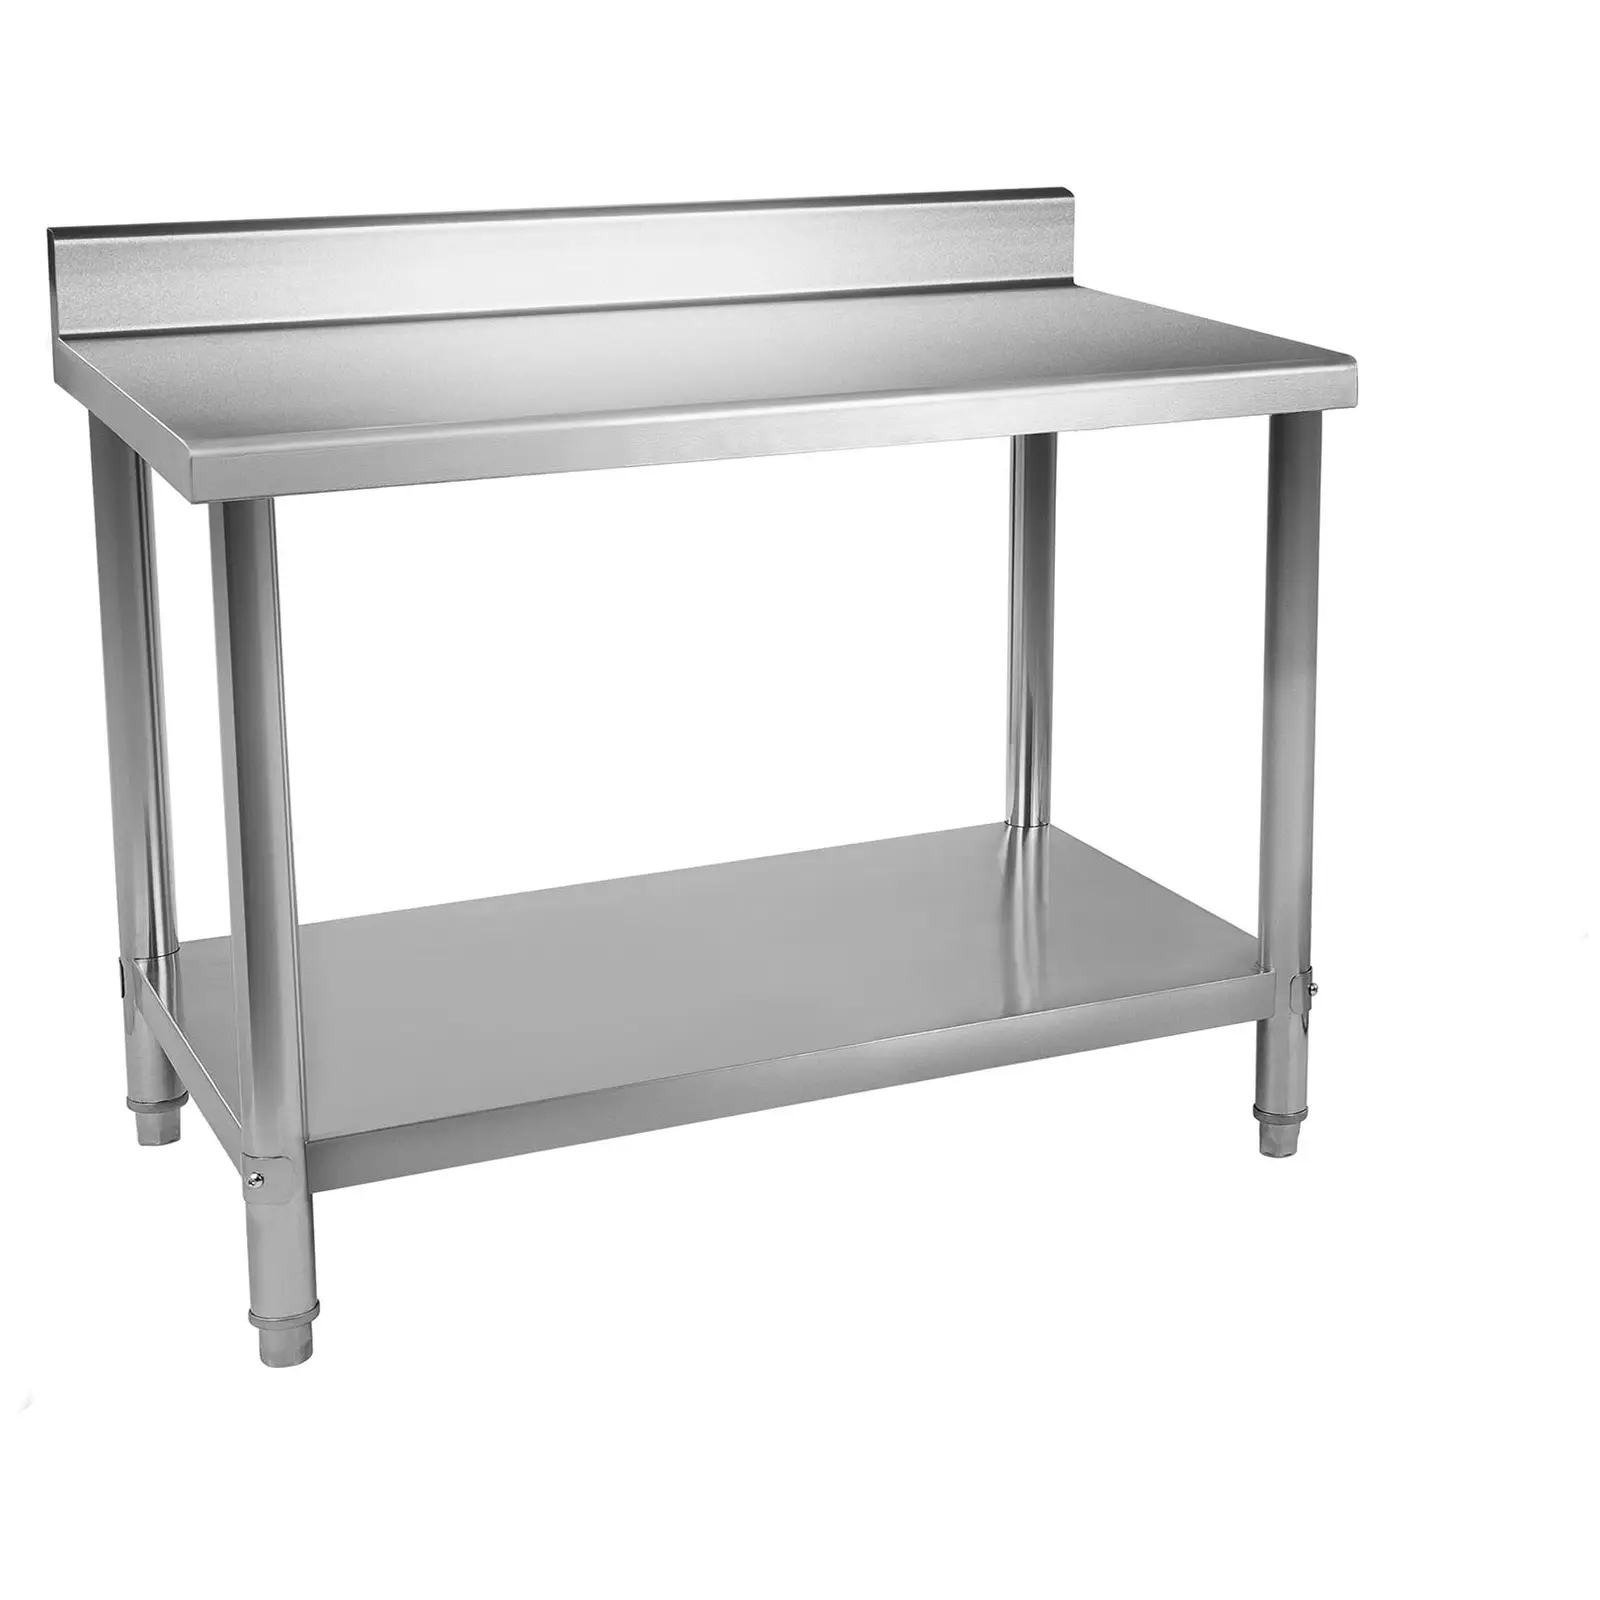 Stainless Steel Work Table - 150 x 60 cm - upstand - 159 kg capacity